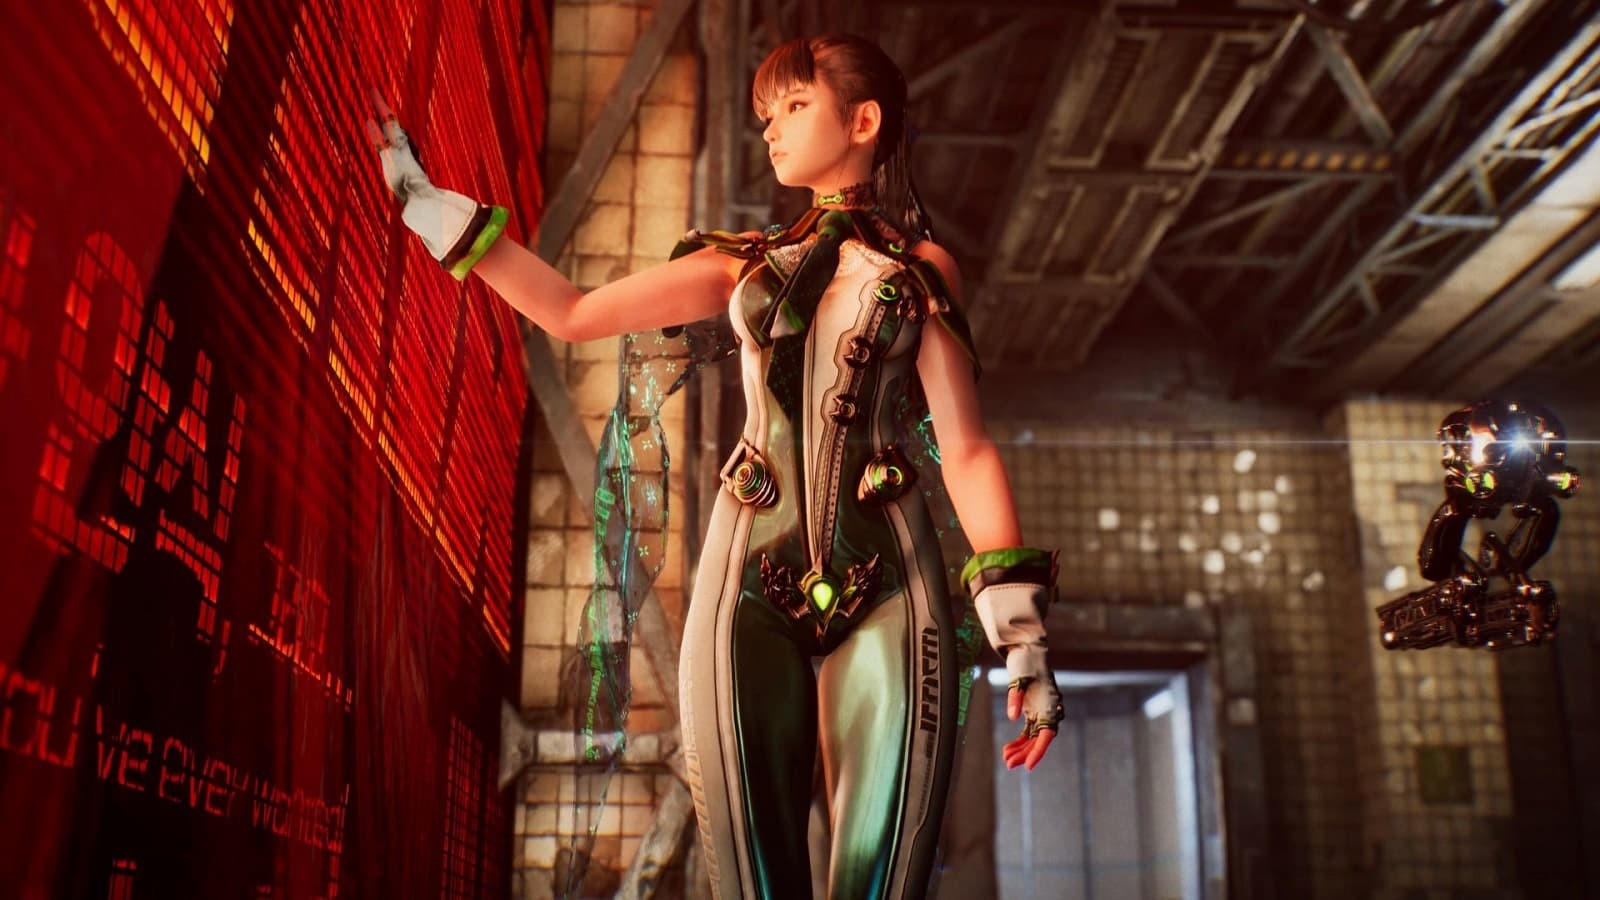 A still of Eve in the game's trailer